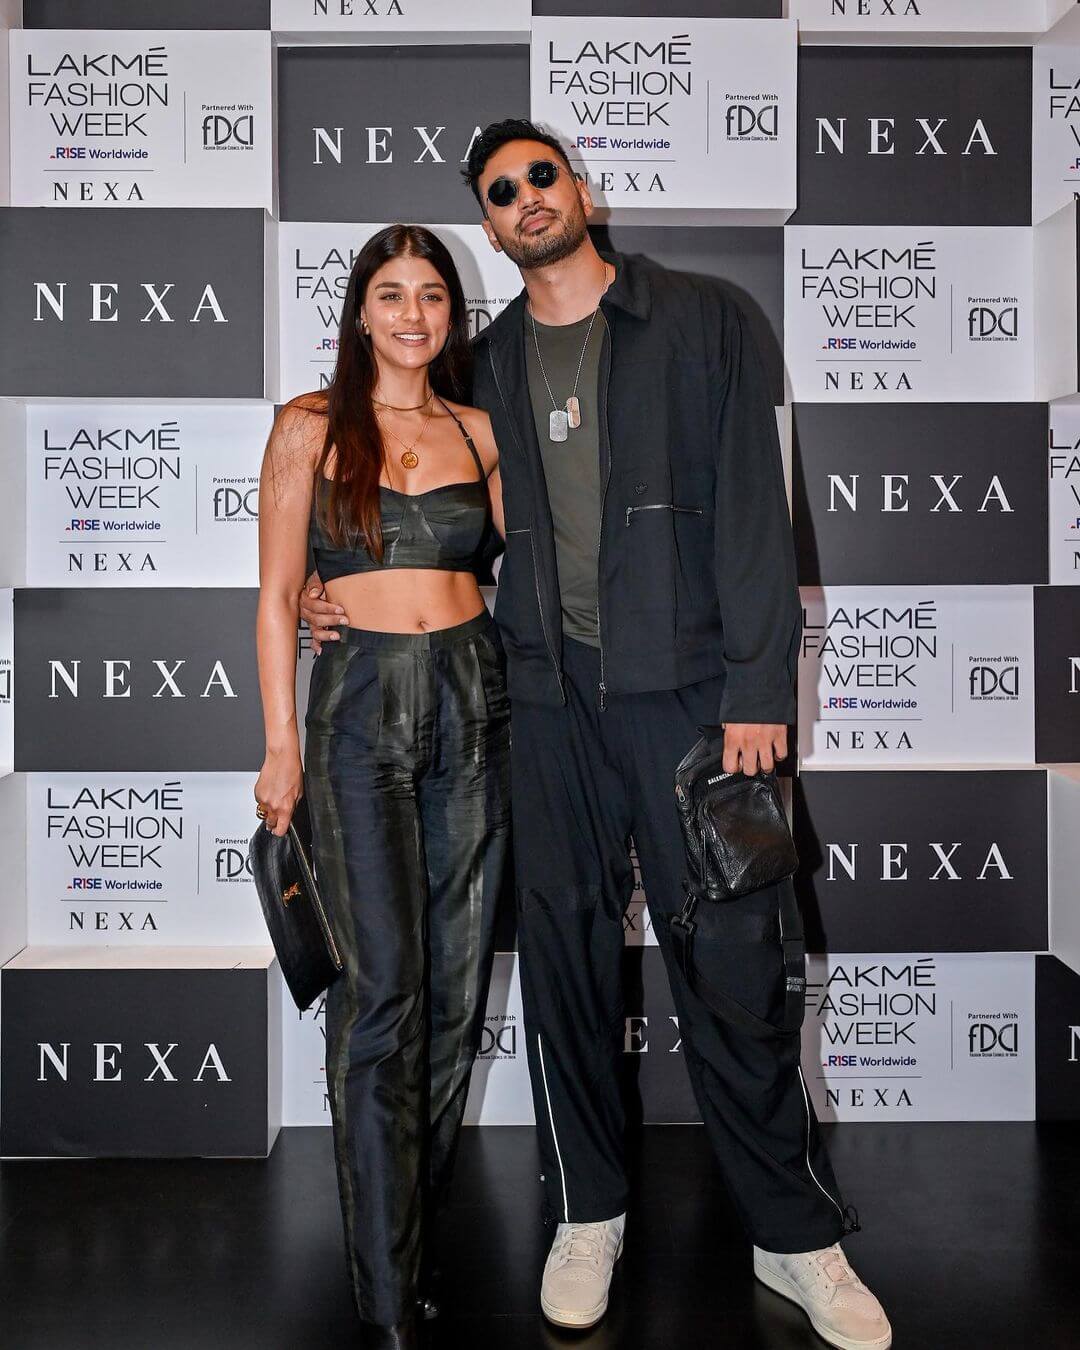 Lakme Fashion Week Bollywood Celebrities Spotted At The Runway - Arjun Kanungo And Carla Ruth Dennis In Cool Black Outfits At Lakme Fashion Week